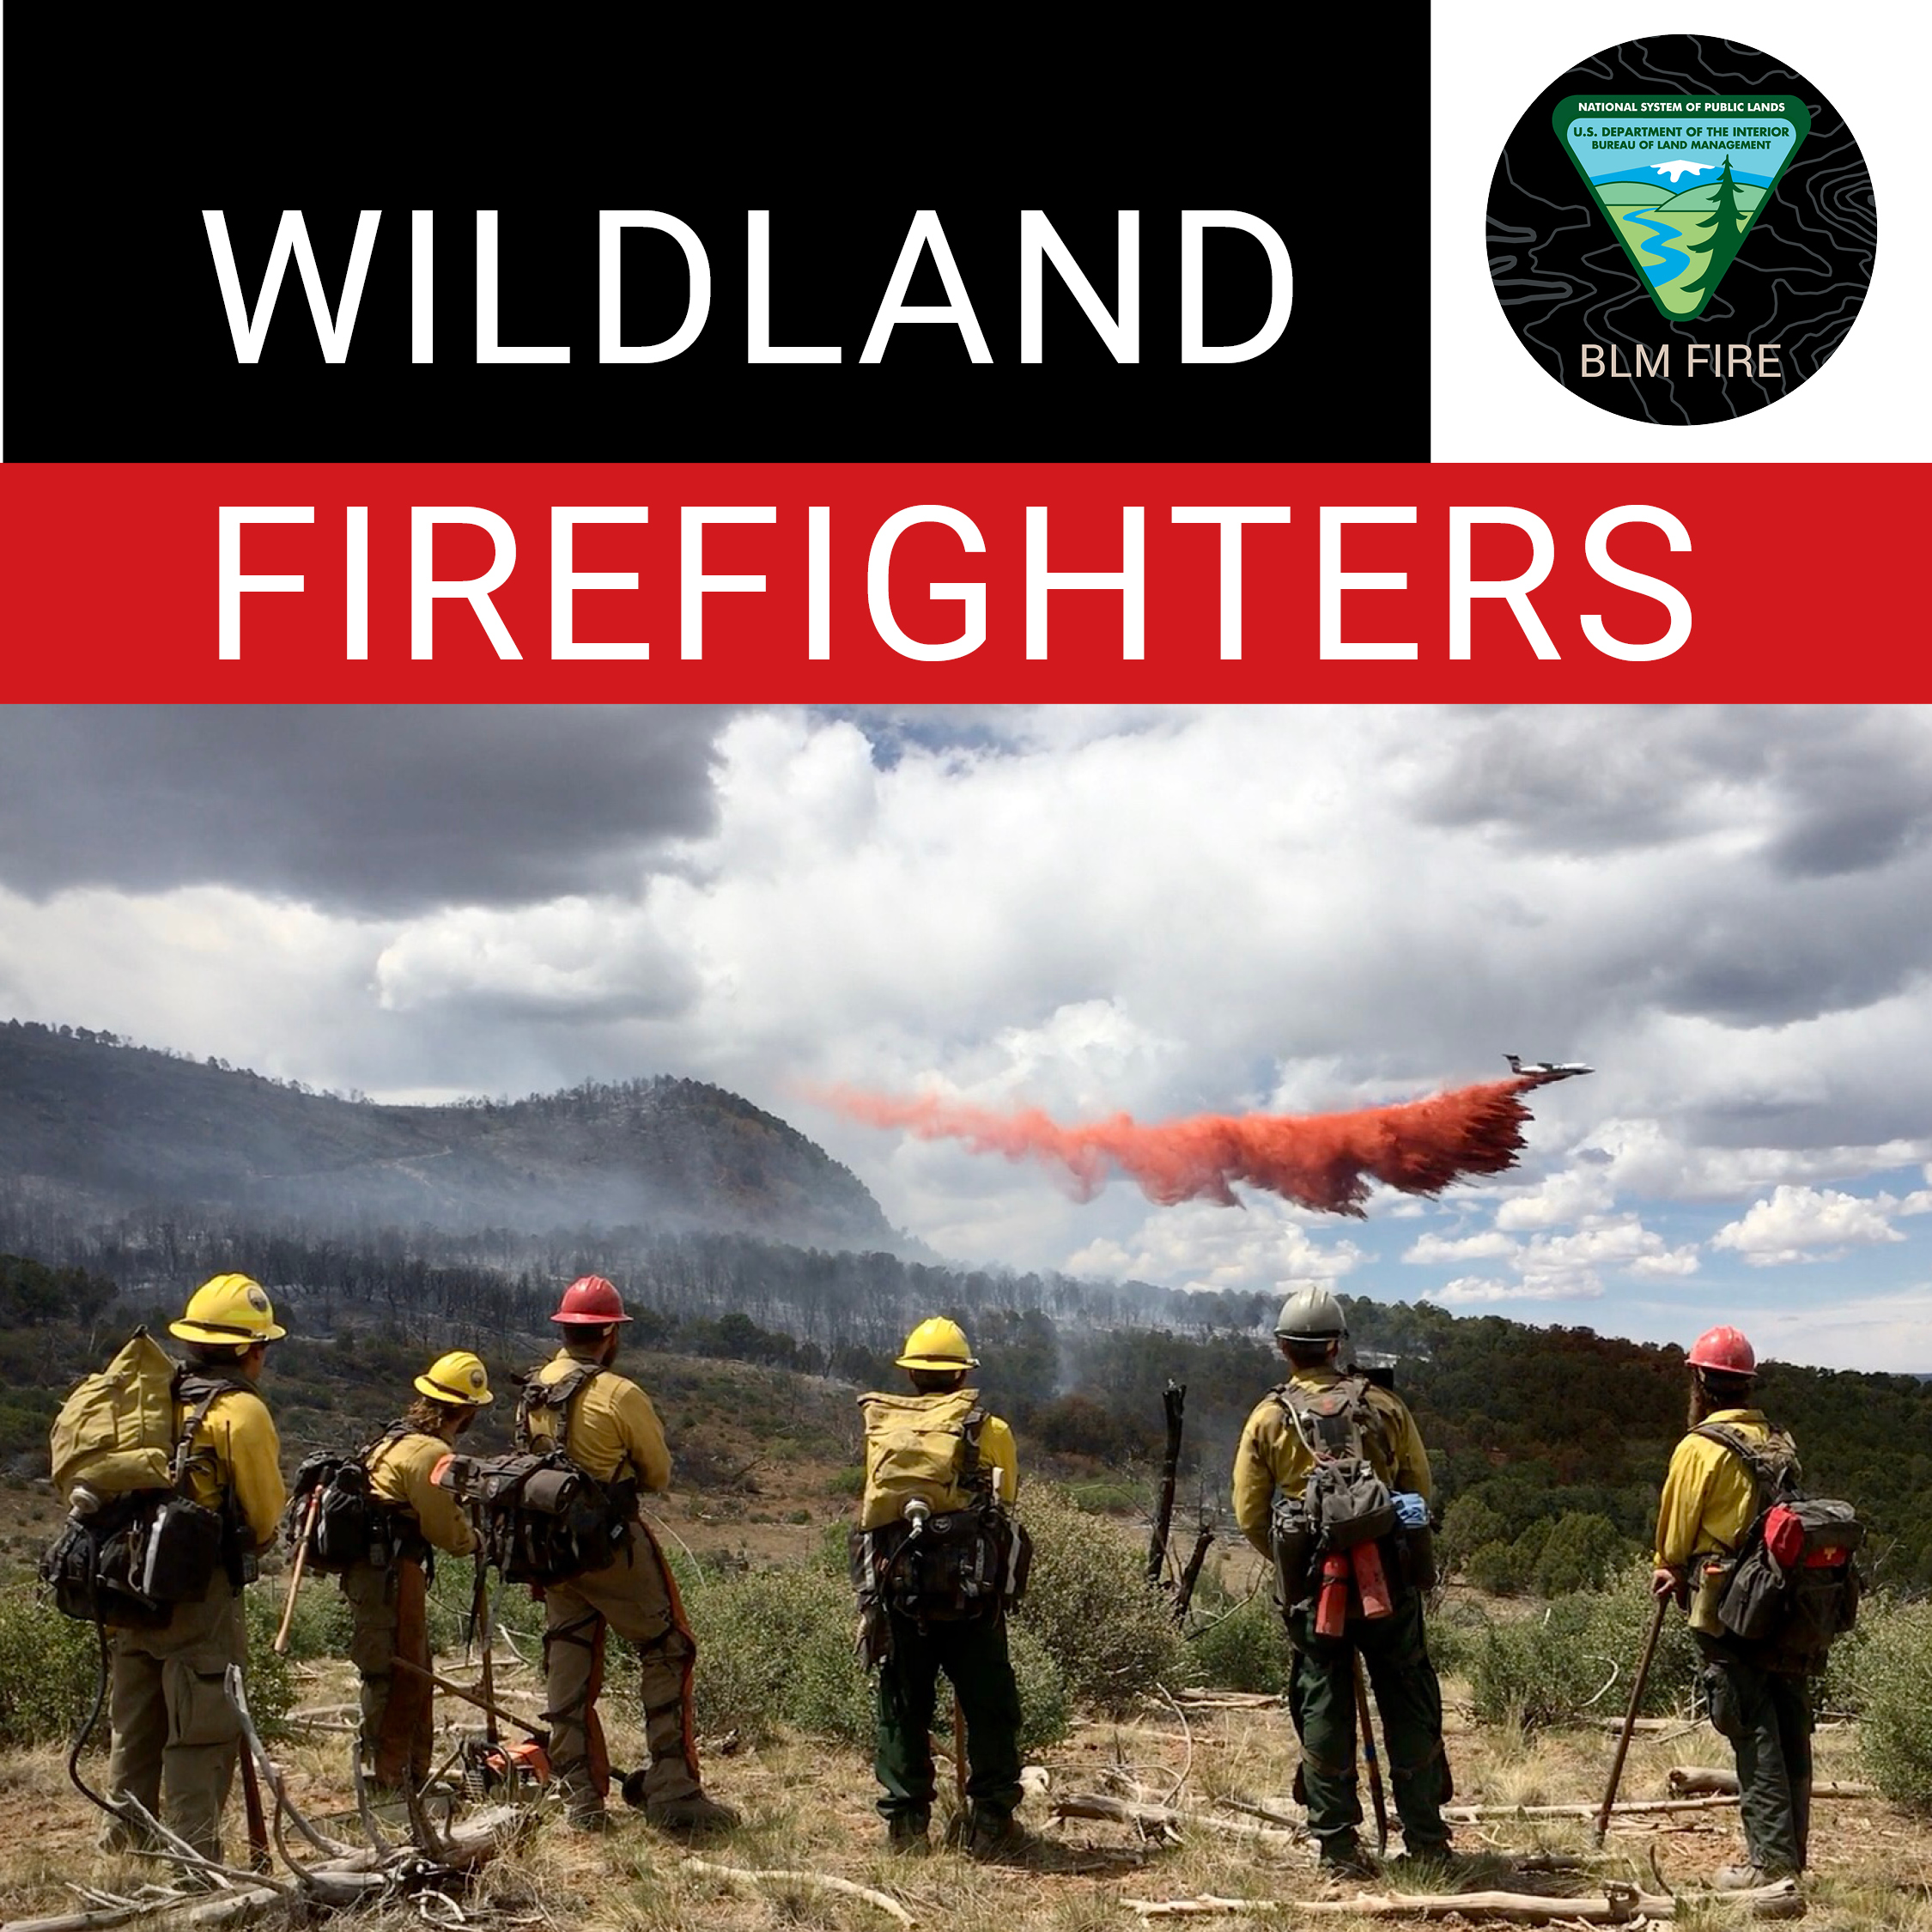 Join BLM Fire for a job in wildland fire.